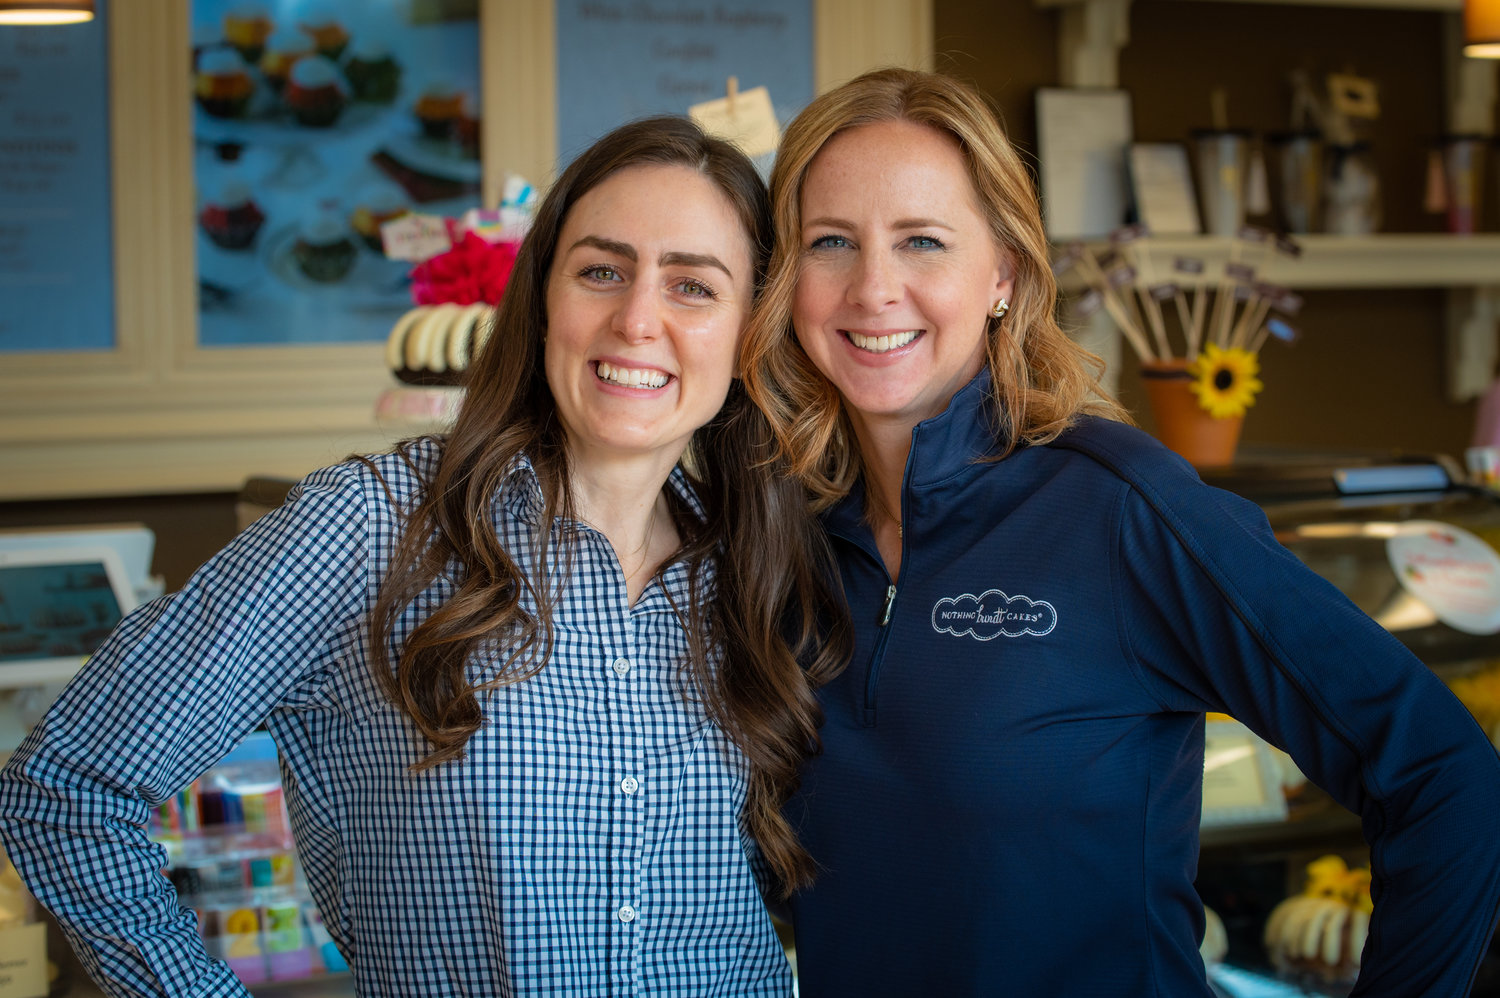 Brianne Hout and Jocelyn King enjoy every day as co-owners of Nothing Bundt Cake at Virginia Gateway.